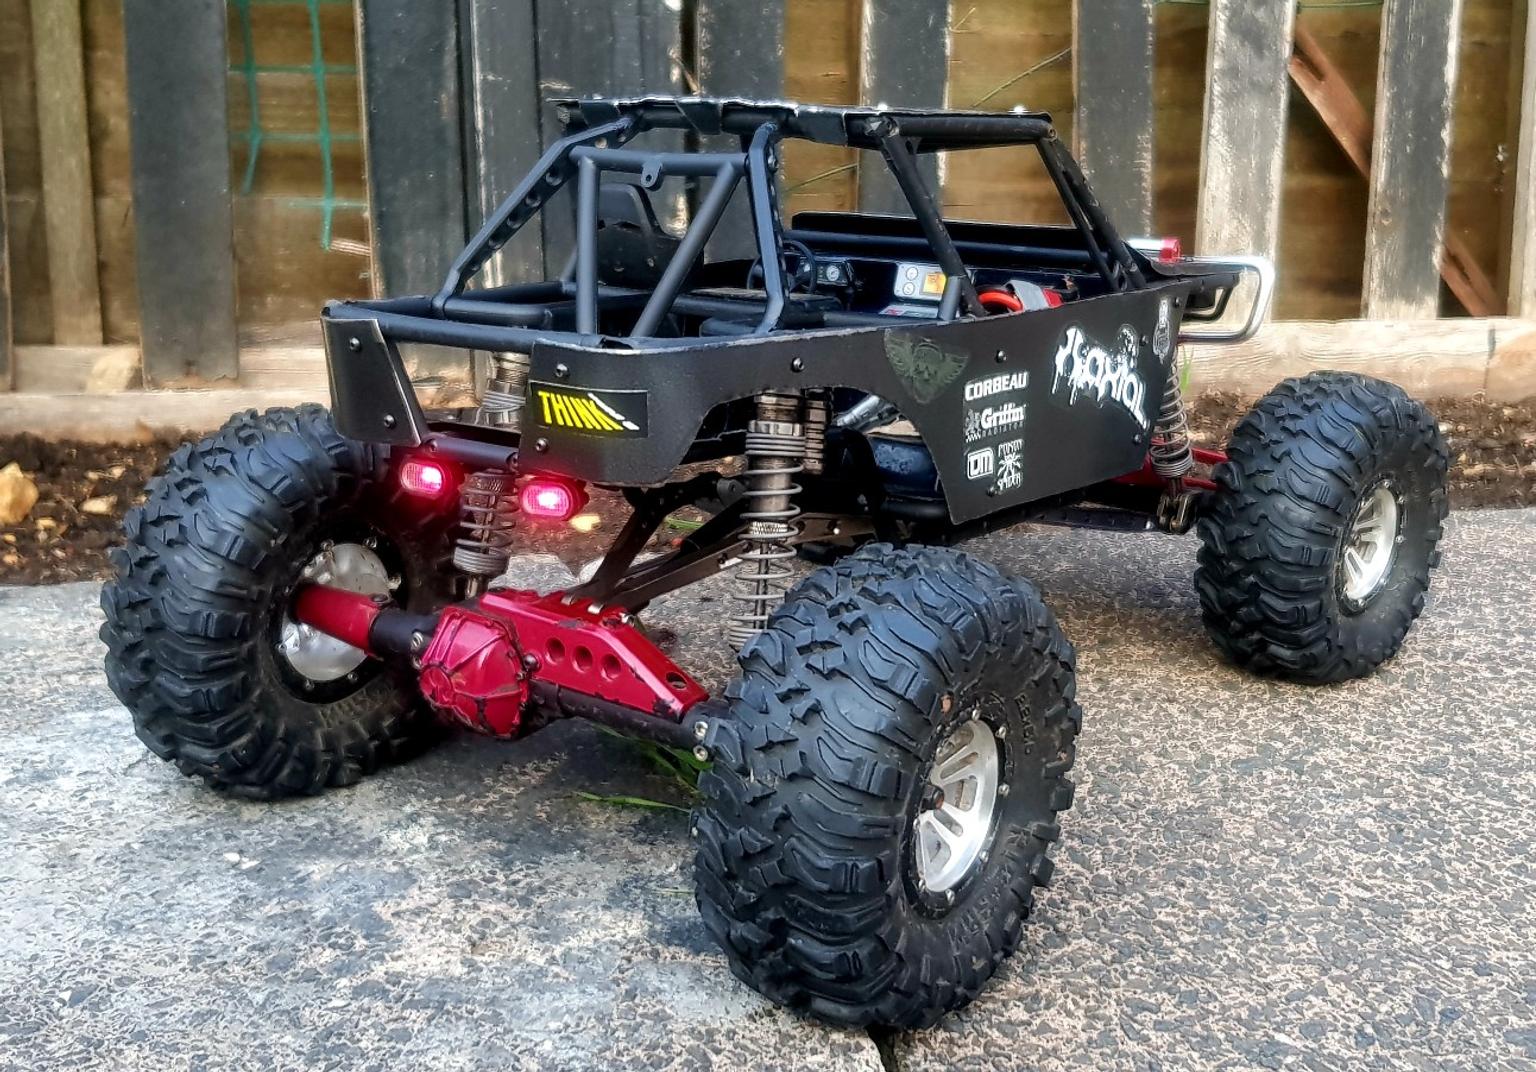 Axial Wraith Rock Crawler Racer Rtr In S70 Barnsley For